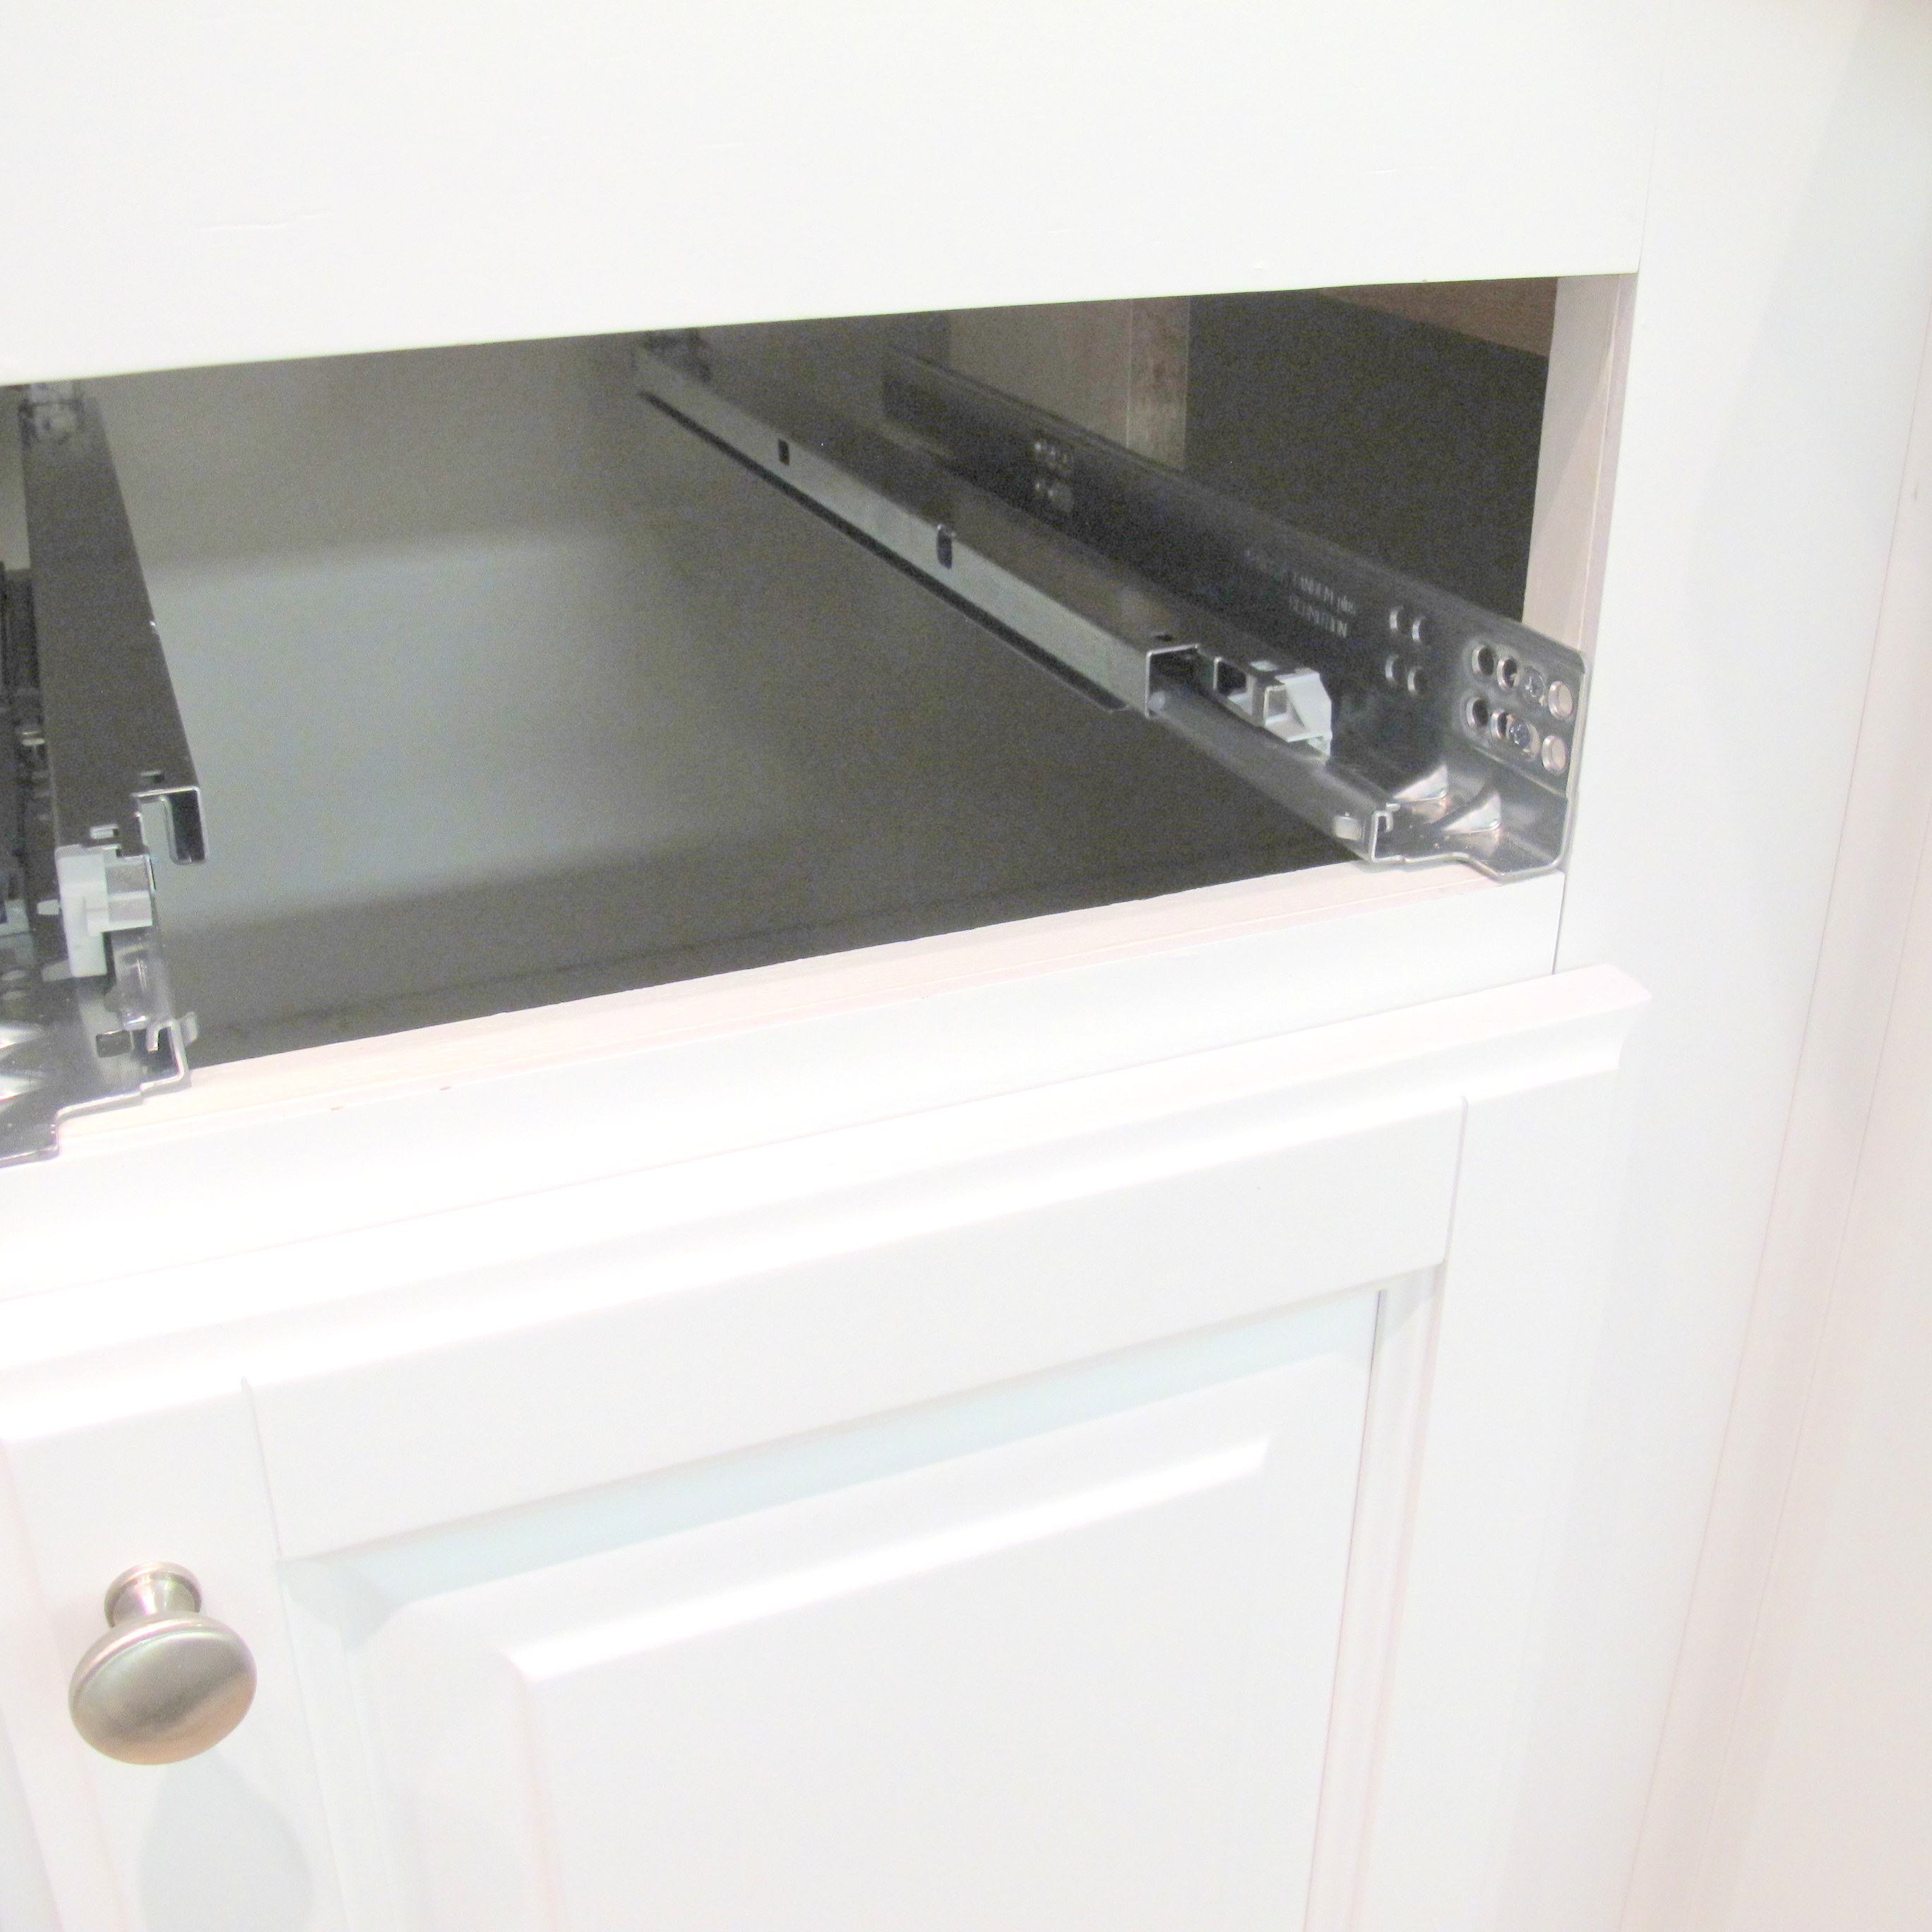 Full extension drawer glides getting installed C & L Design Specialists